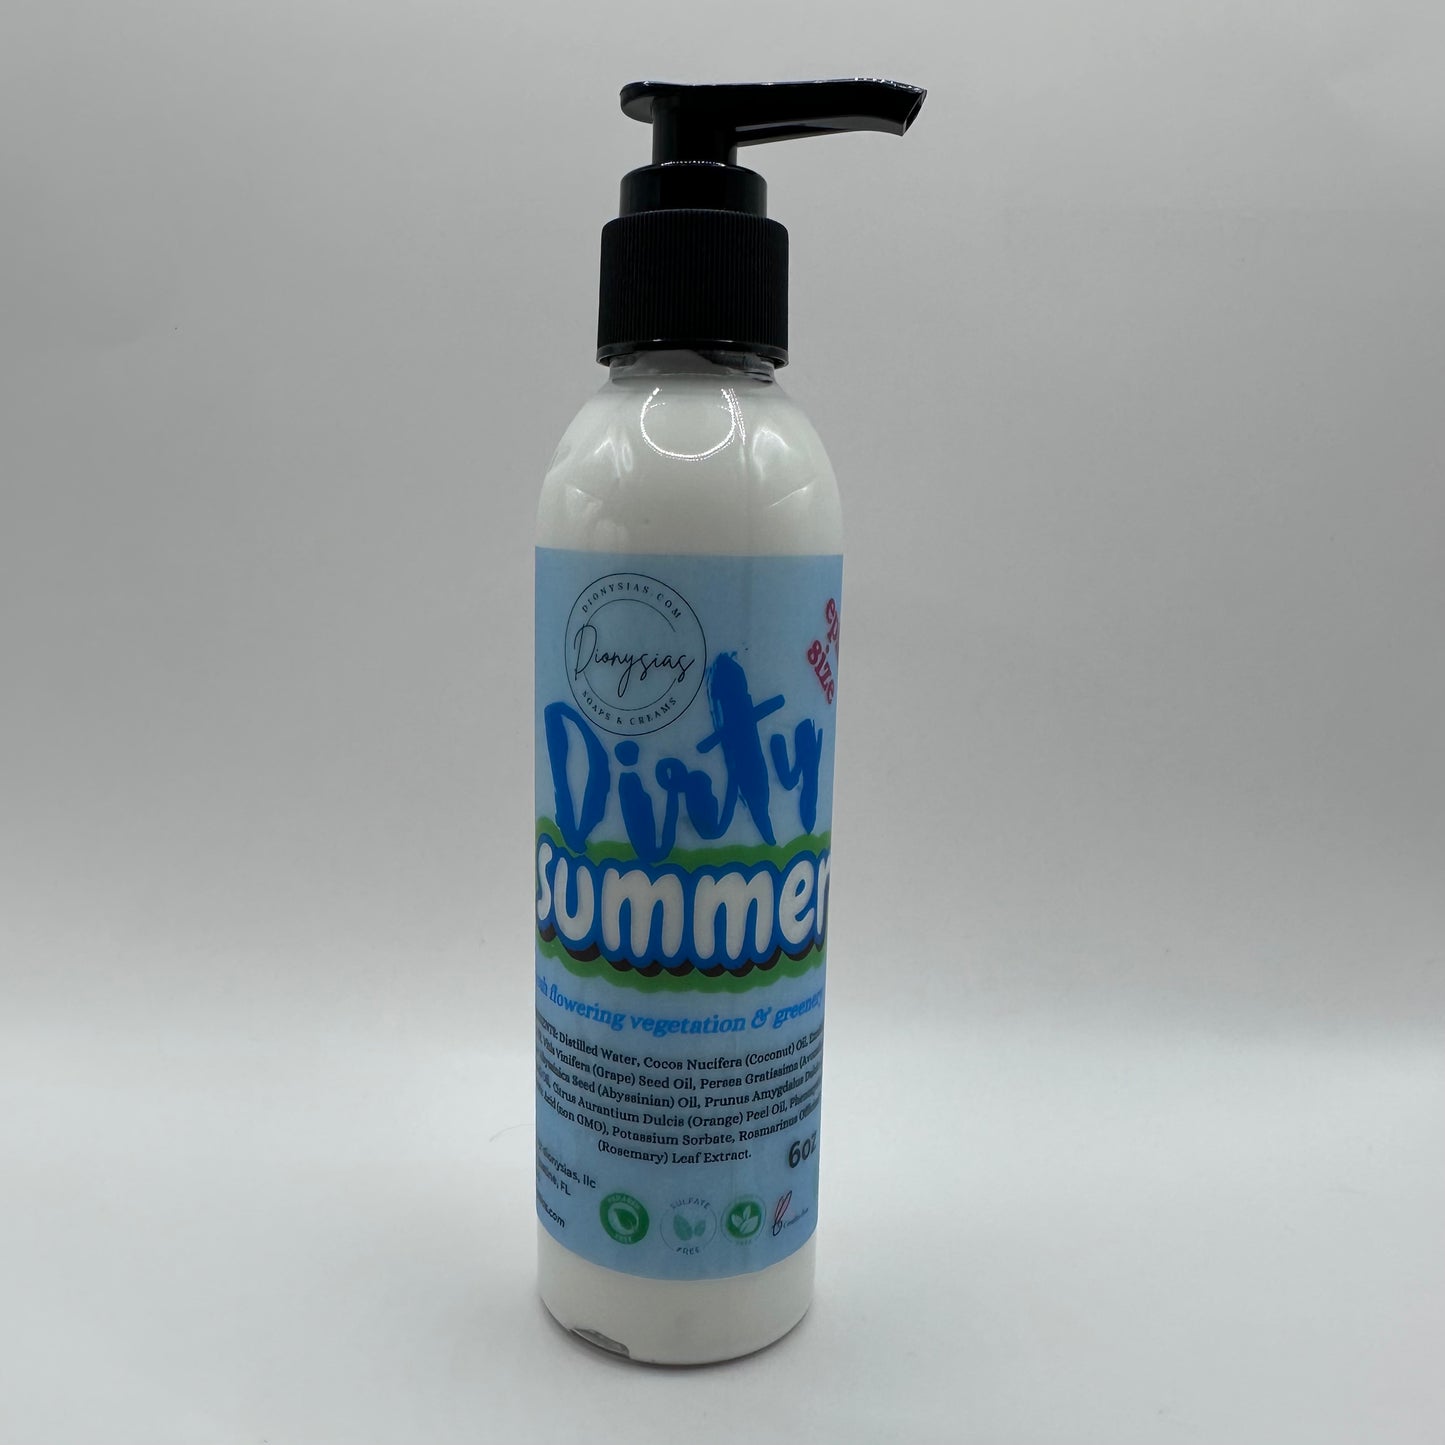 Dirty Summer EPIC Hand Creme